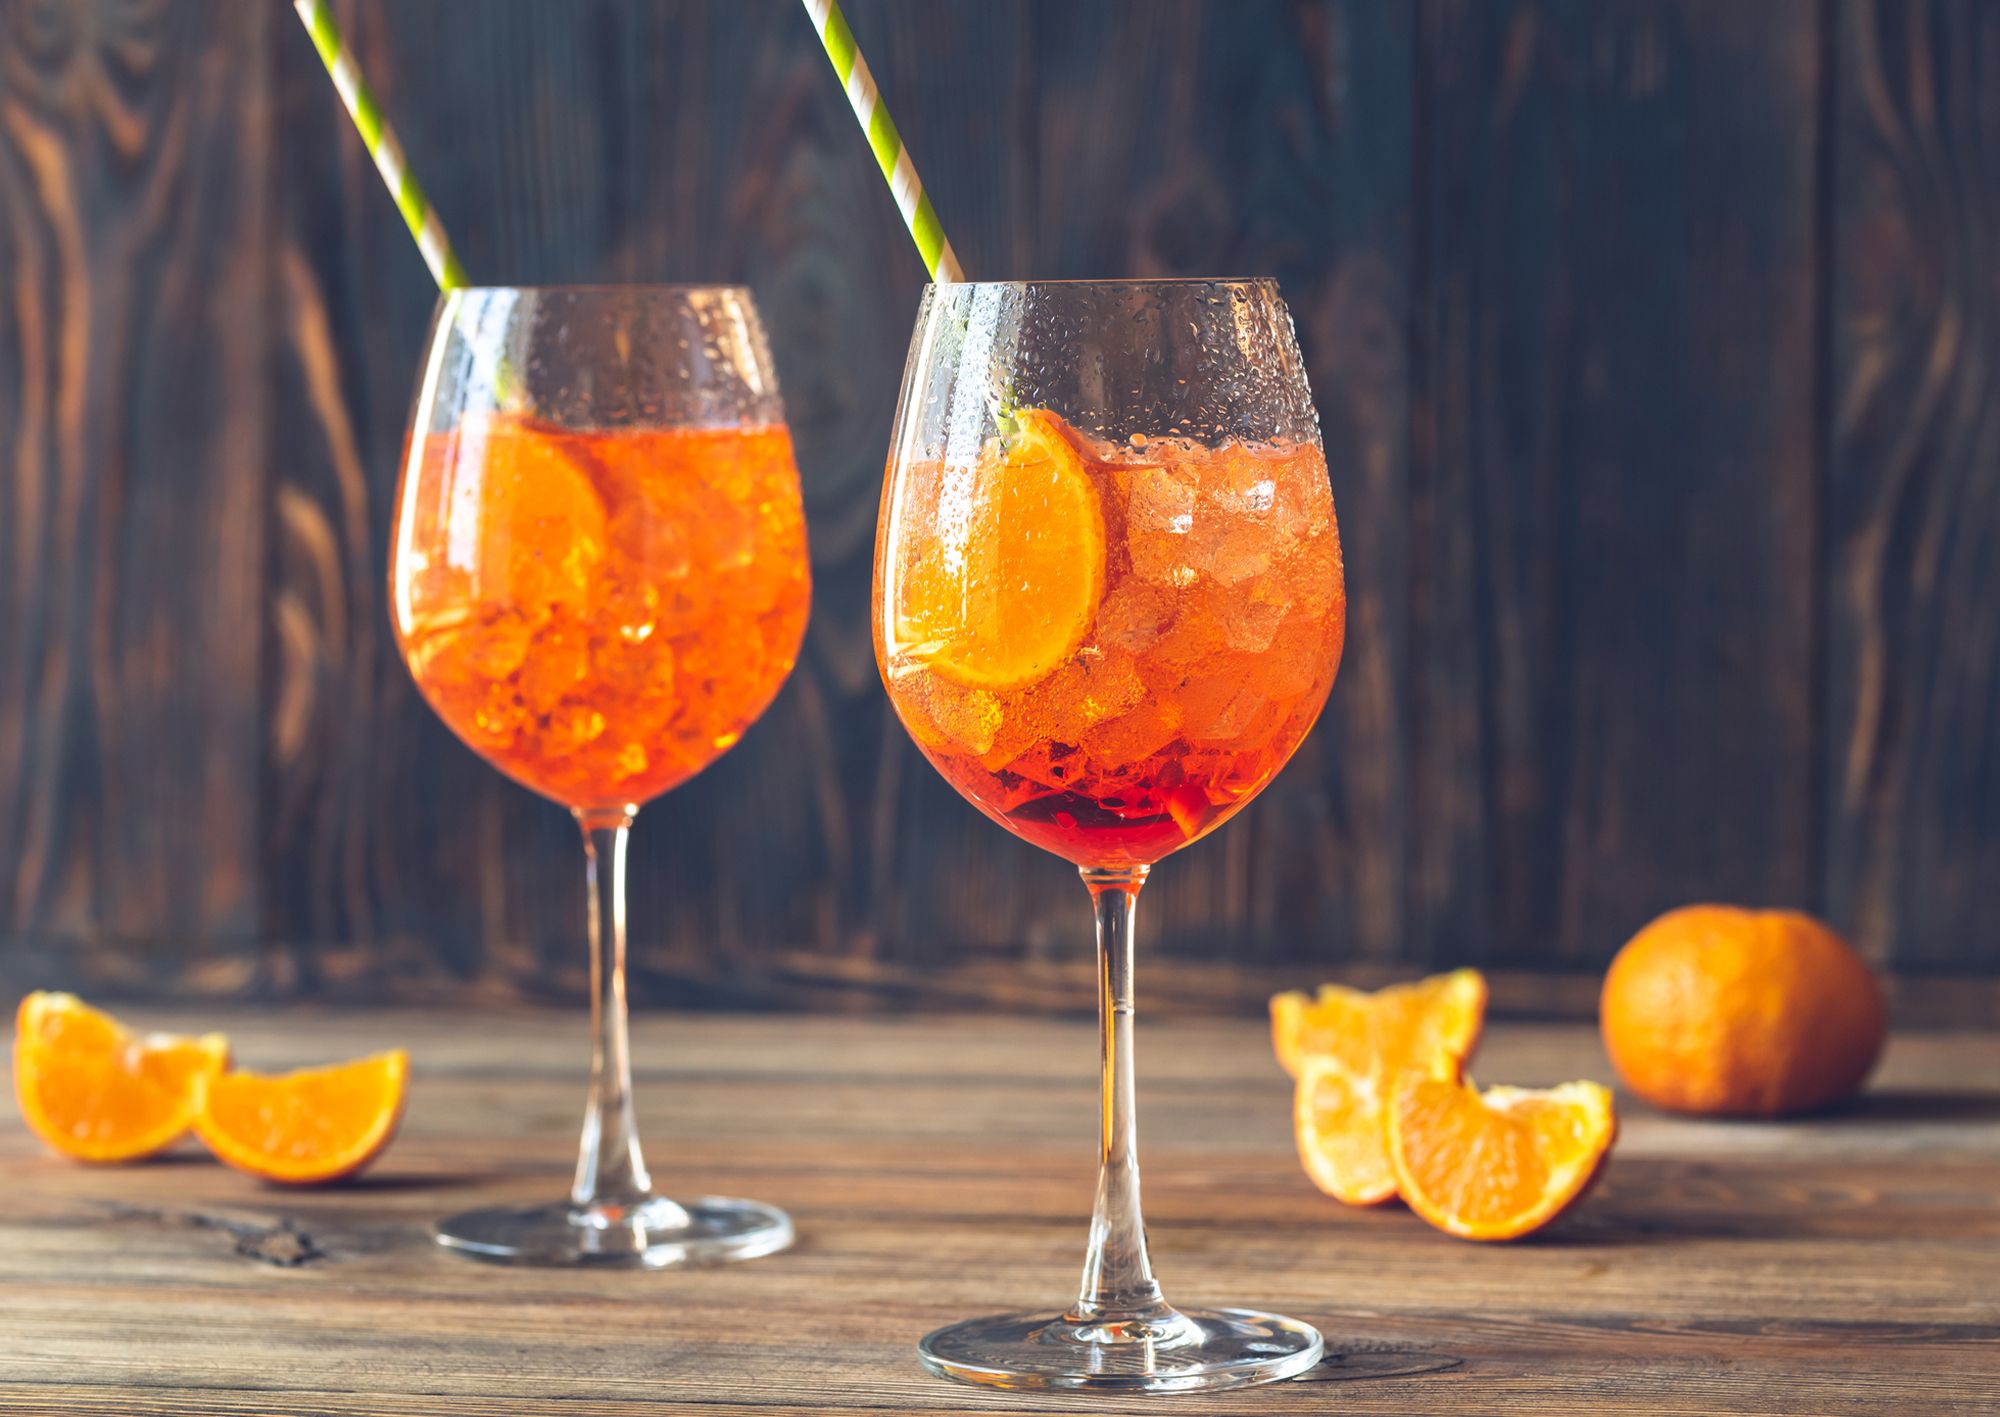 Can you use Campari instead of Aperol?